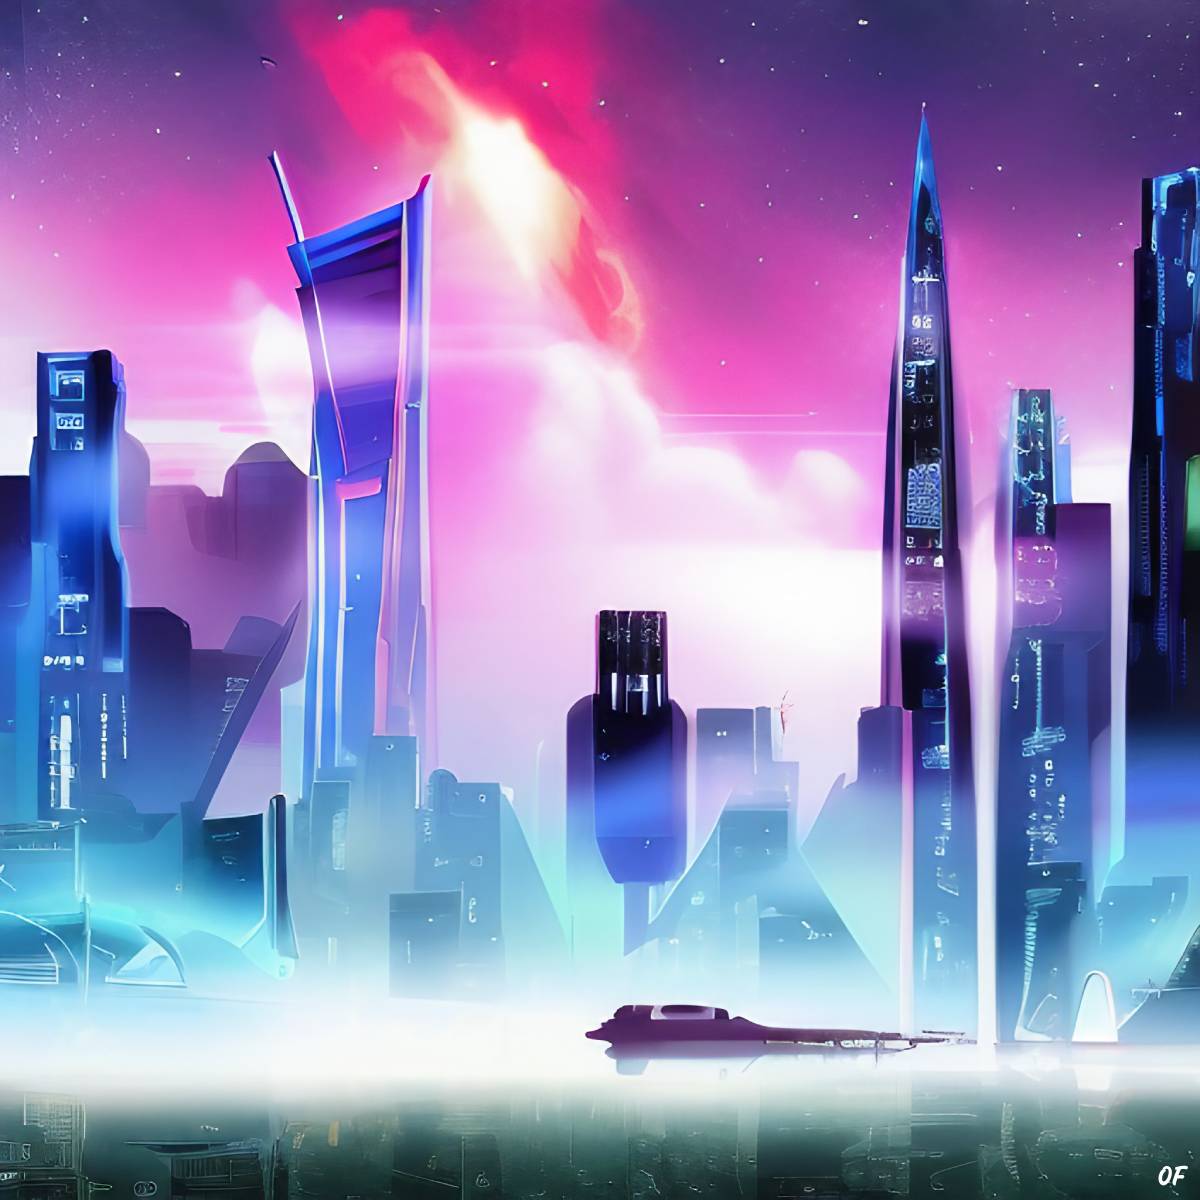 A futuristic metropolis with sleek skyscrapers, bustling streets, and hovering vehicles, set against a backdrop of a stunning nebula.